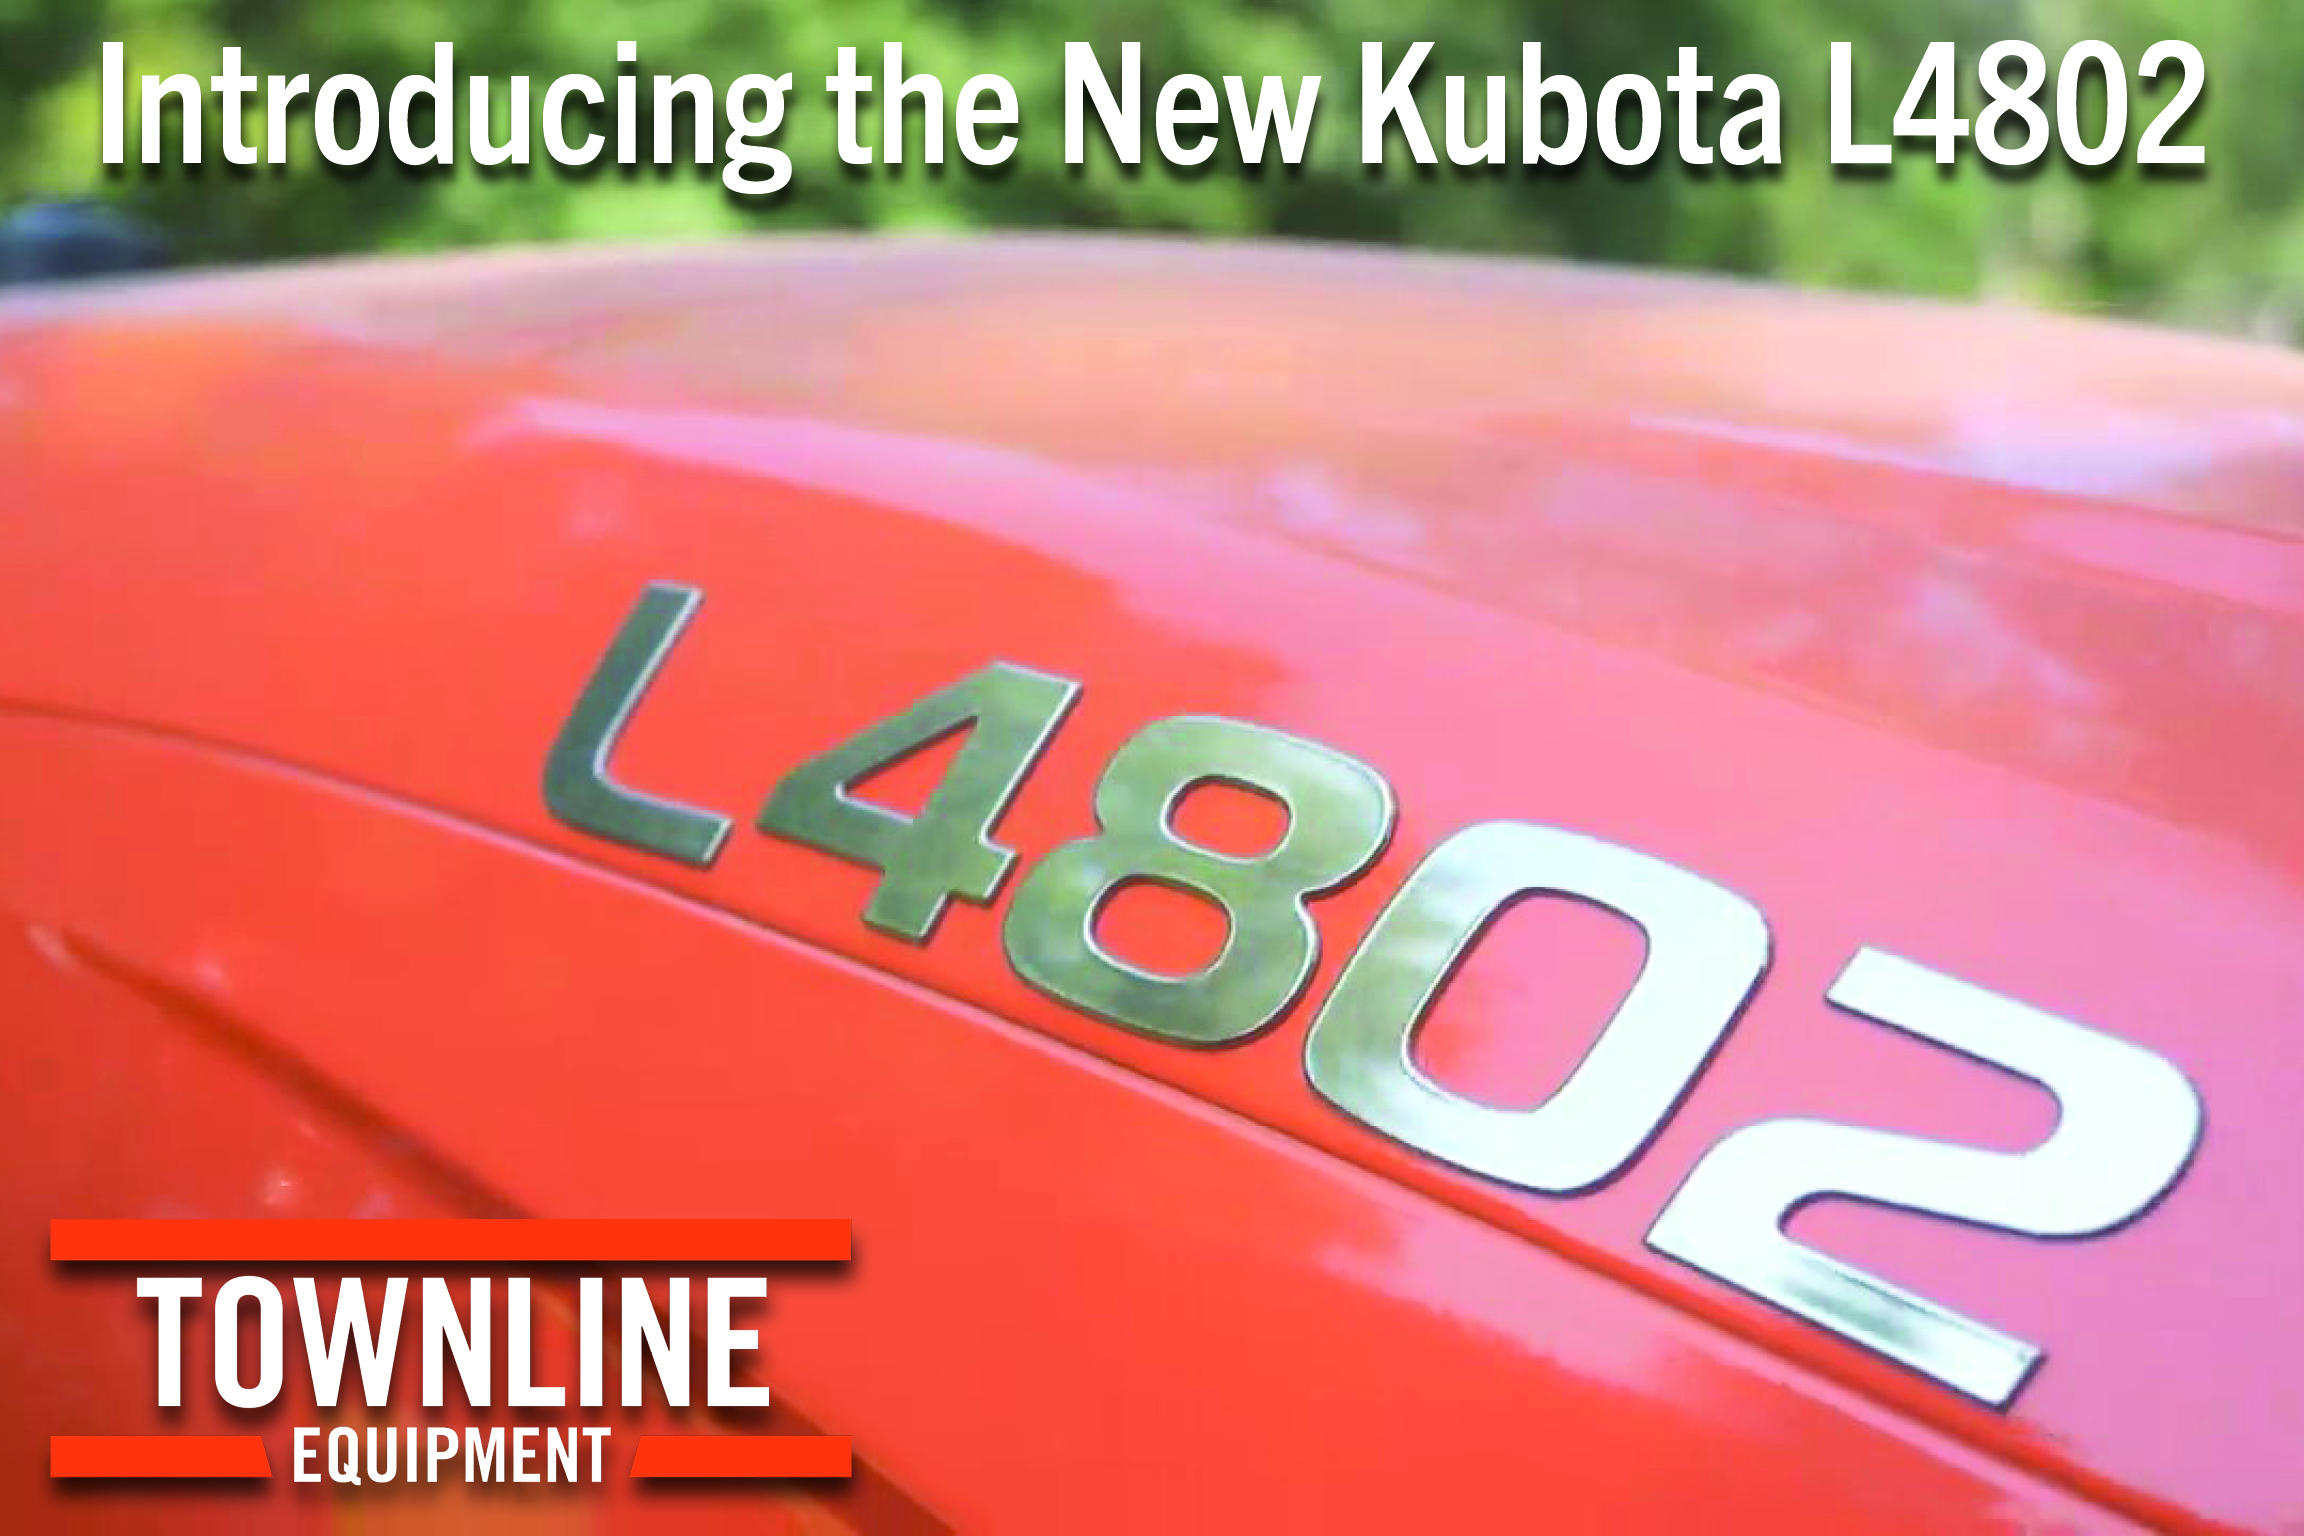 Introducing the New Kubota L4802 Tractor